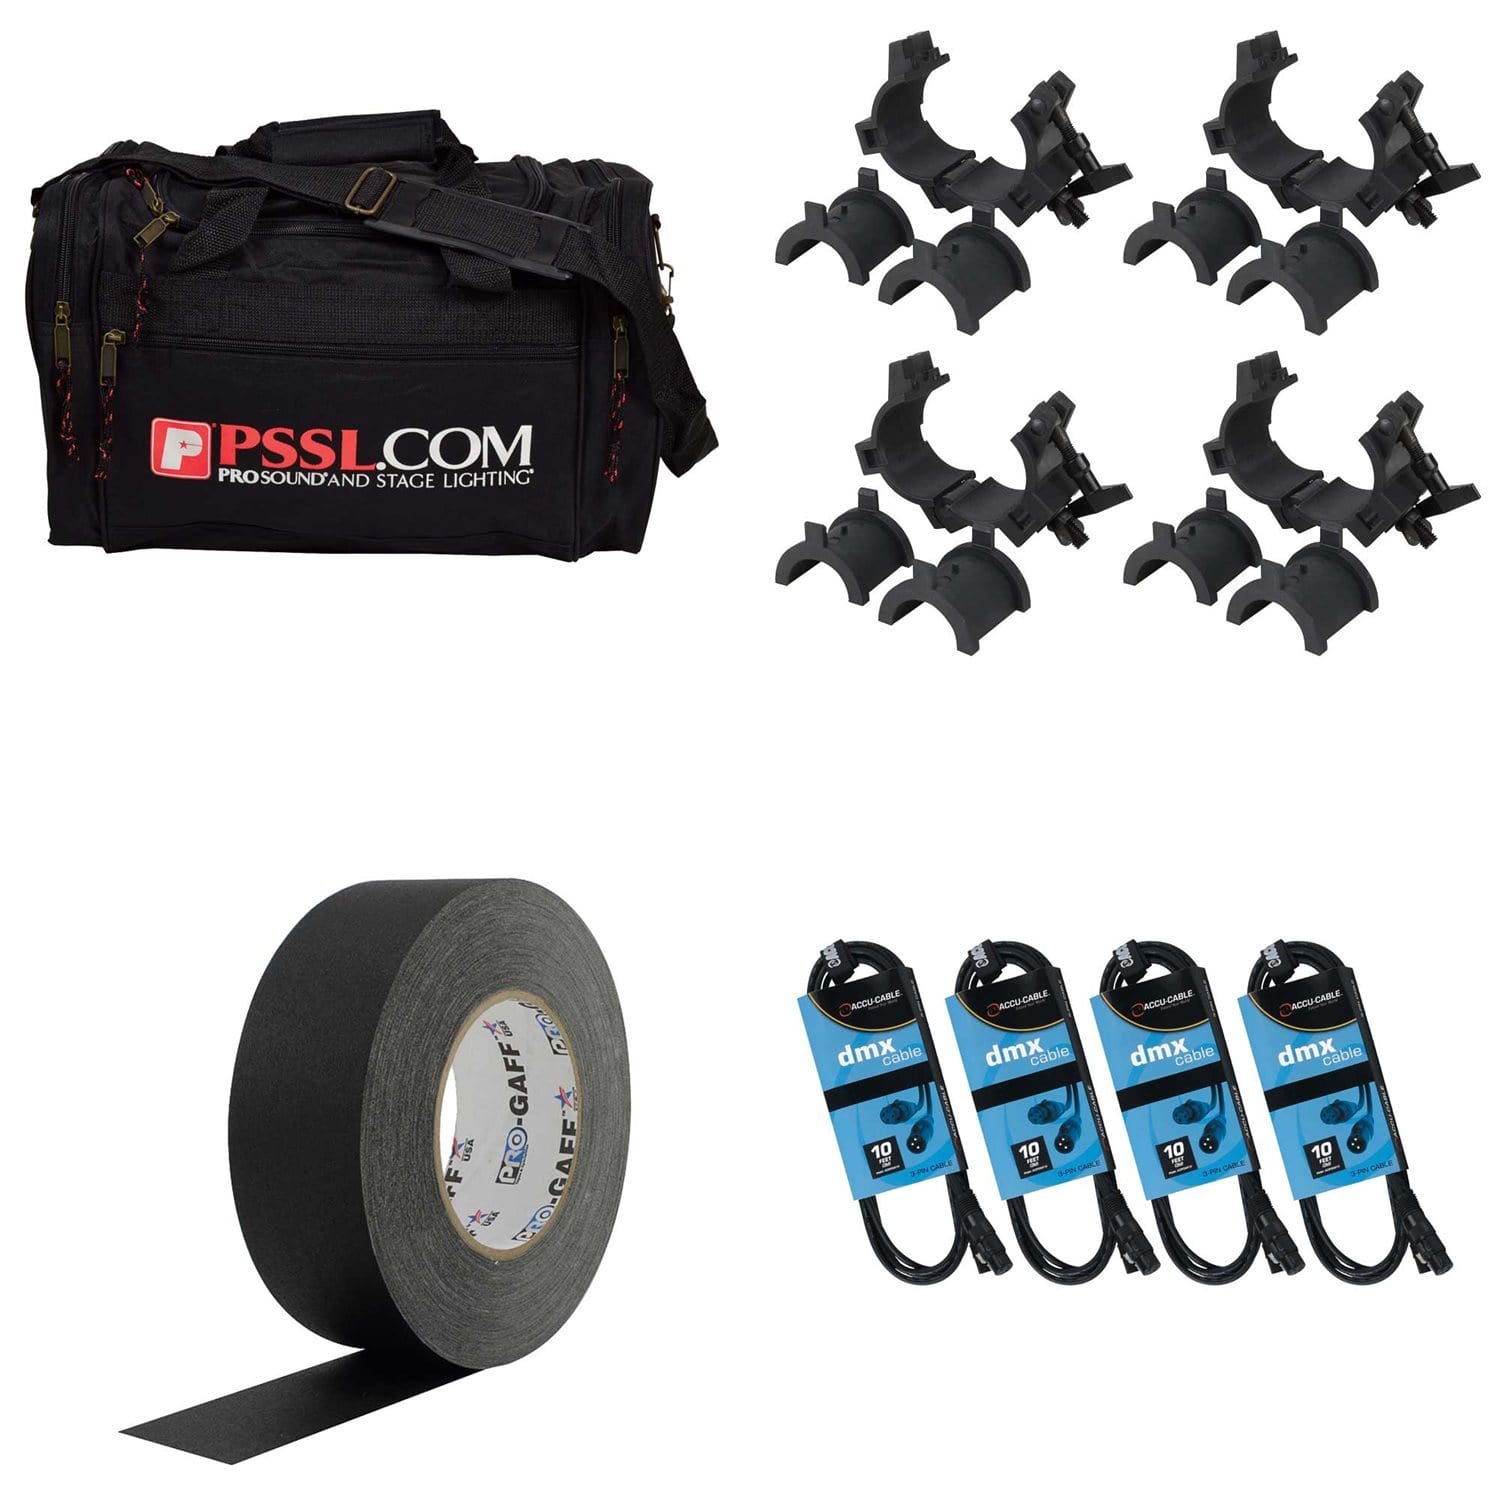 Lighting Essentials Pack with Gaffers Tape 10ft DMX Cables & Bag - PSSL ProSound and Stage Lighting